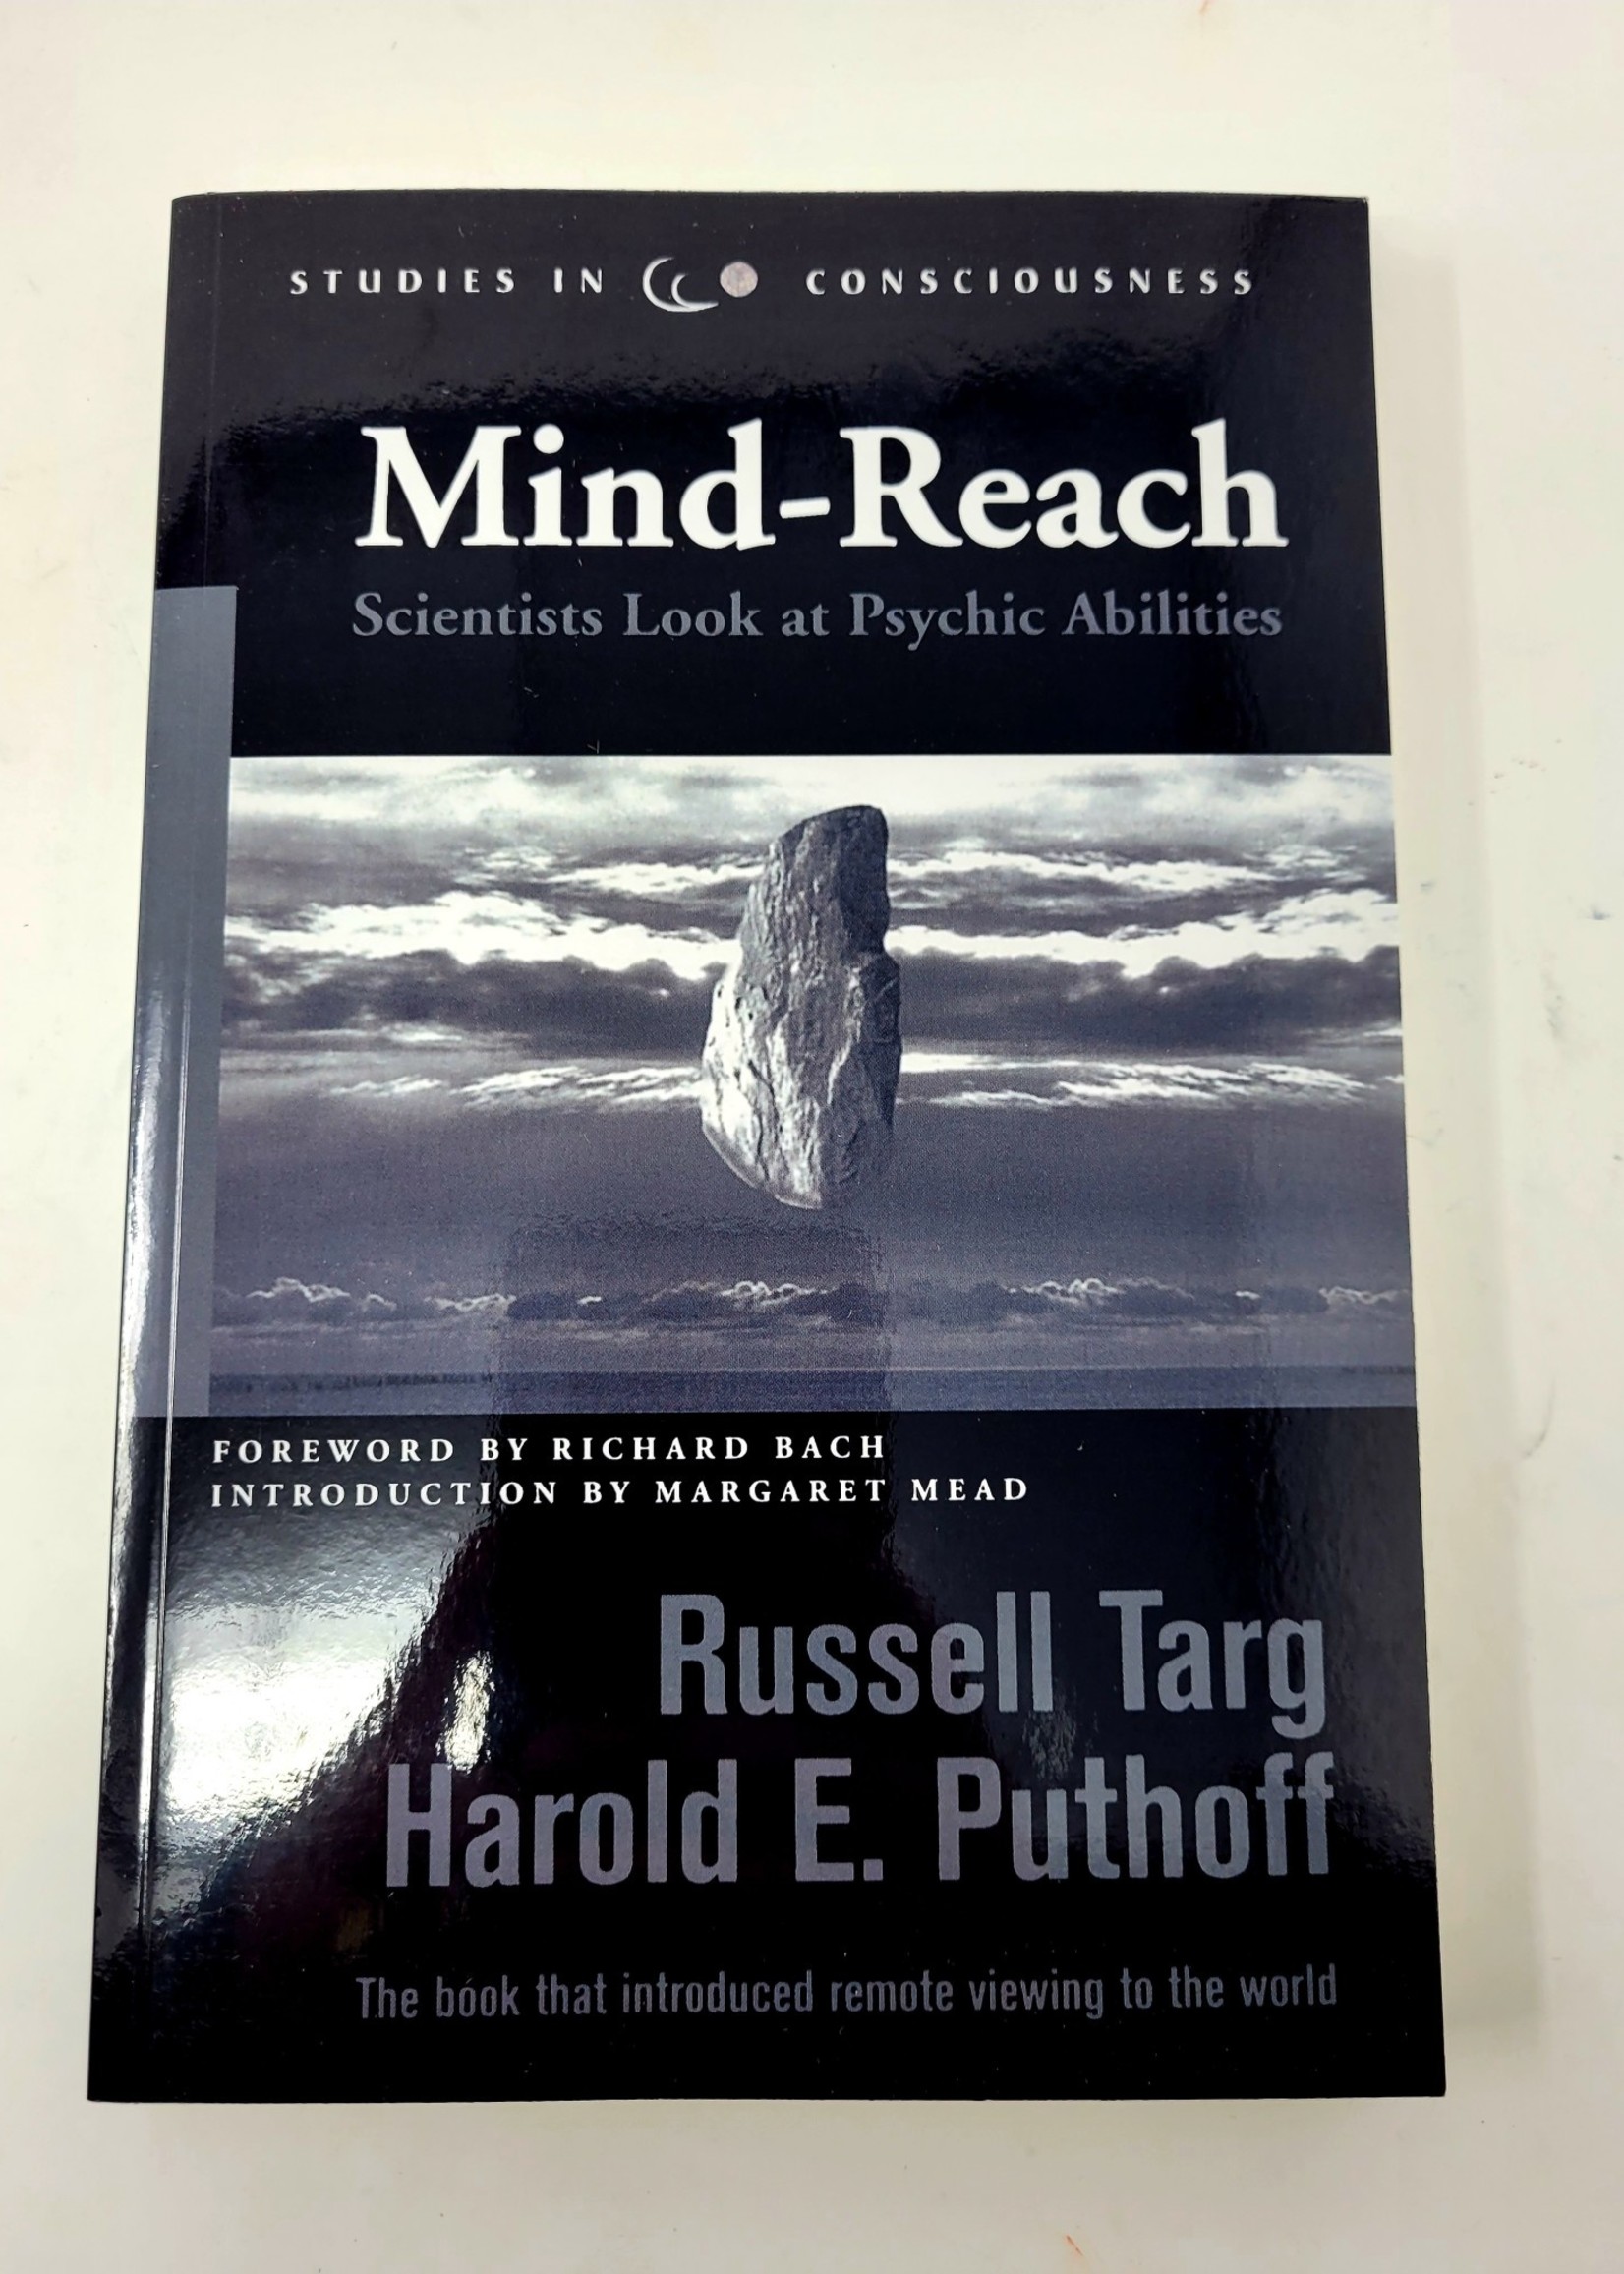 Mind-reach: Scientists look at psychic ability - by Russell Targ and Harold E. Puthoff